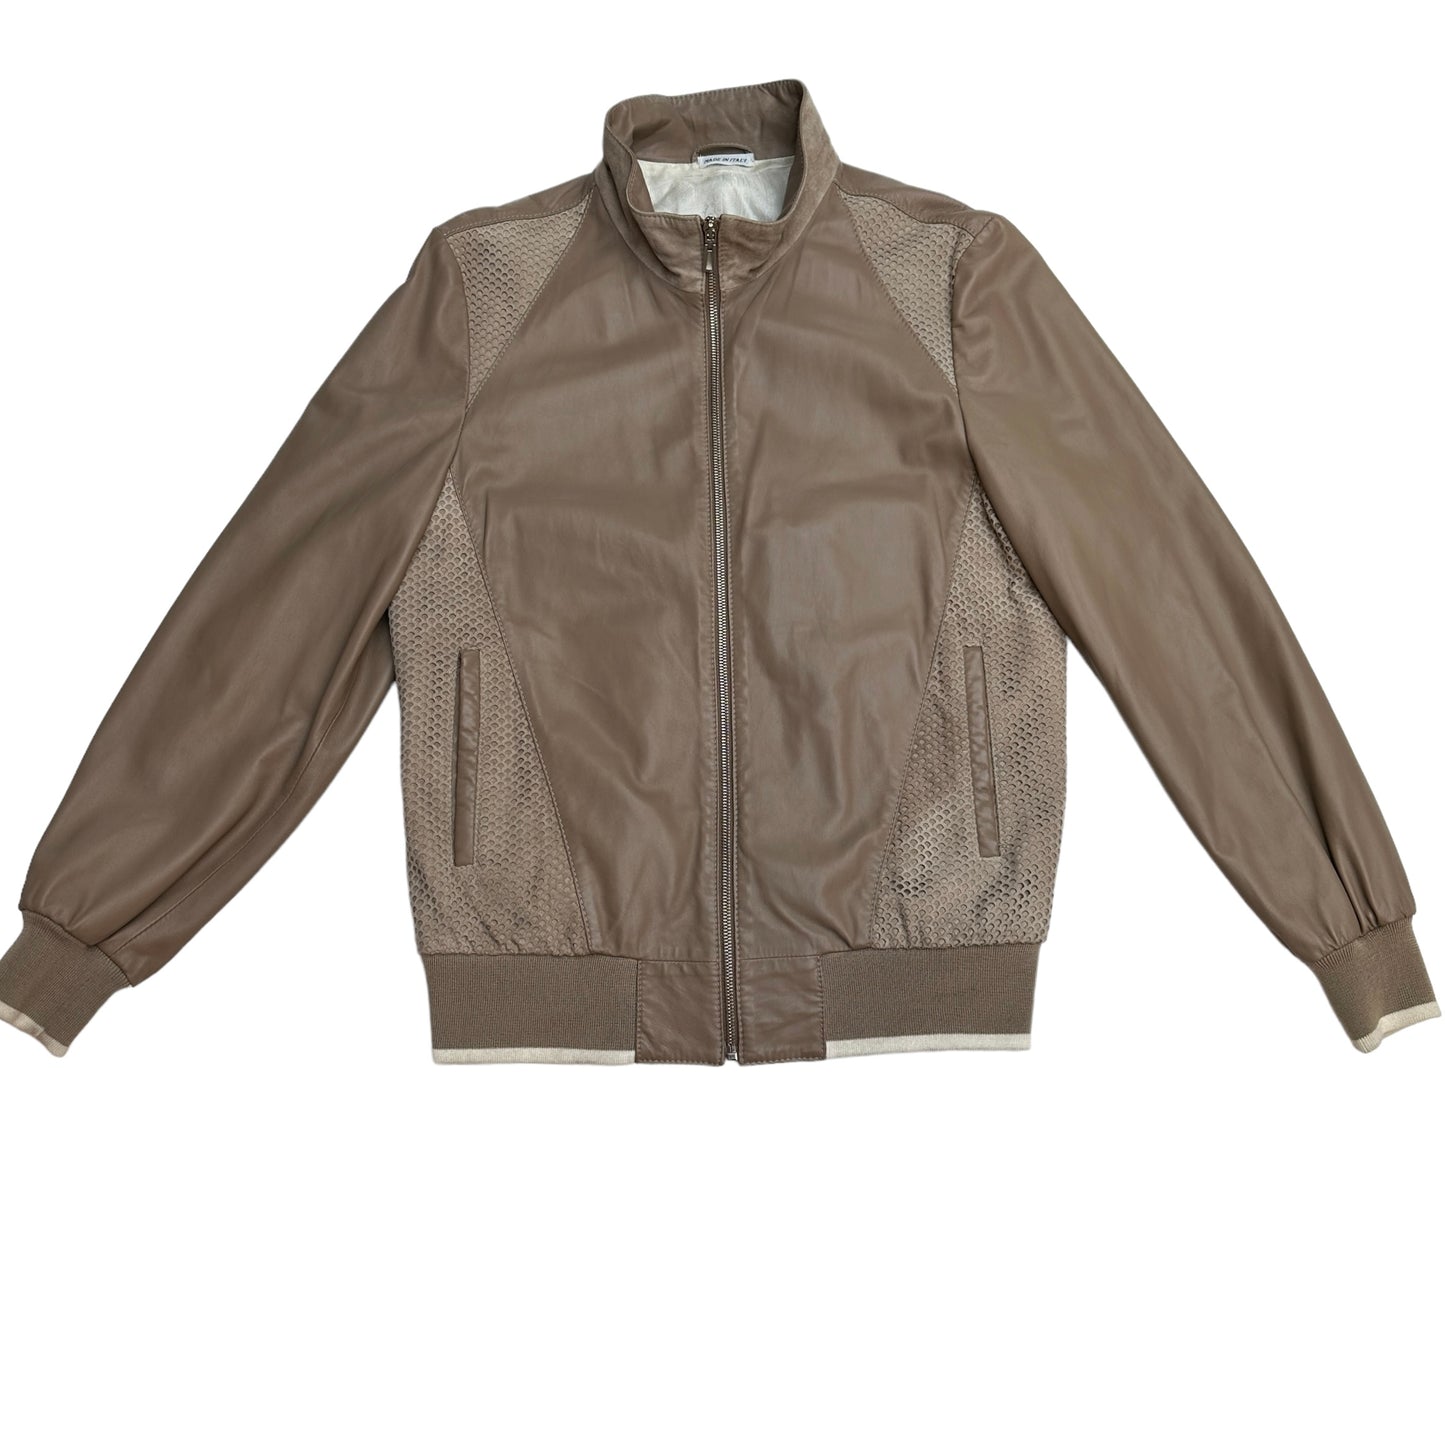 Brown Leather Jacket - M